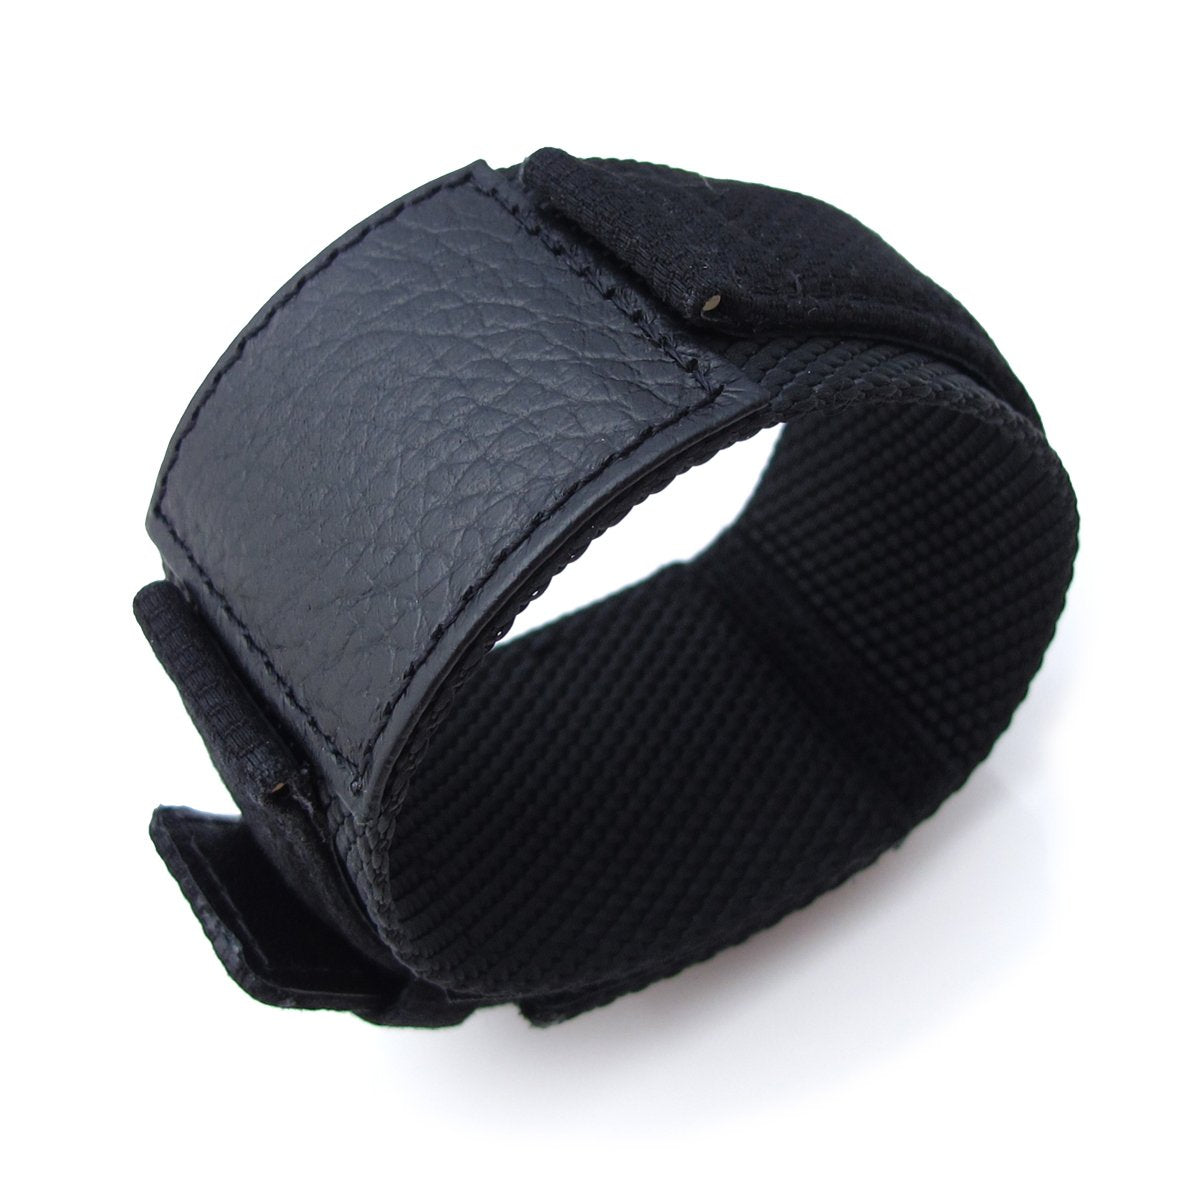 MiLTAT 21mm Double Layer Nylon Black Tactical Velcro Watch Strap Strapcode Watch Bands